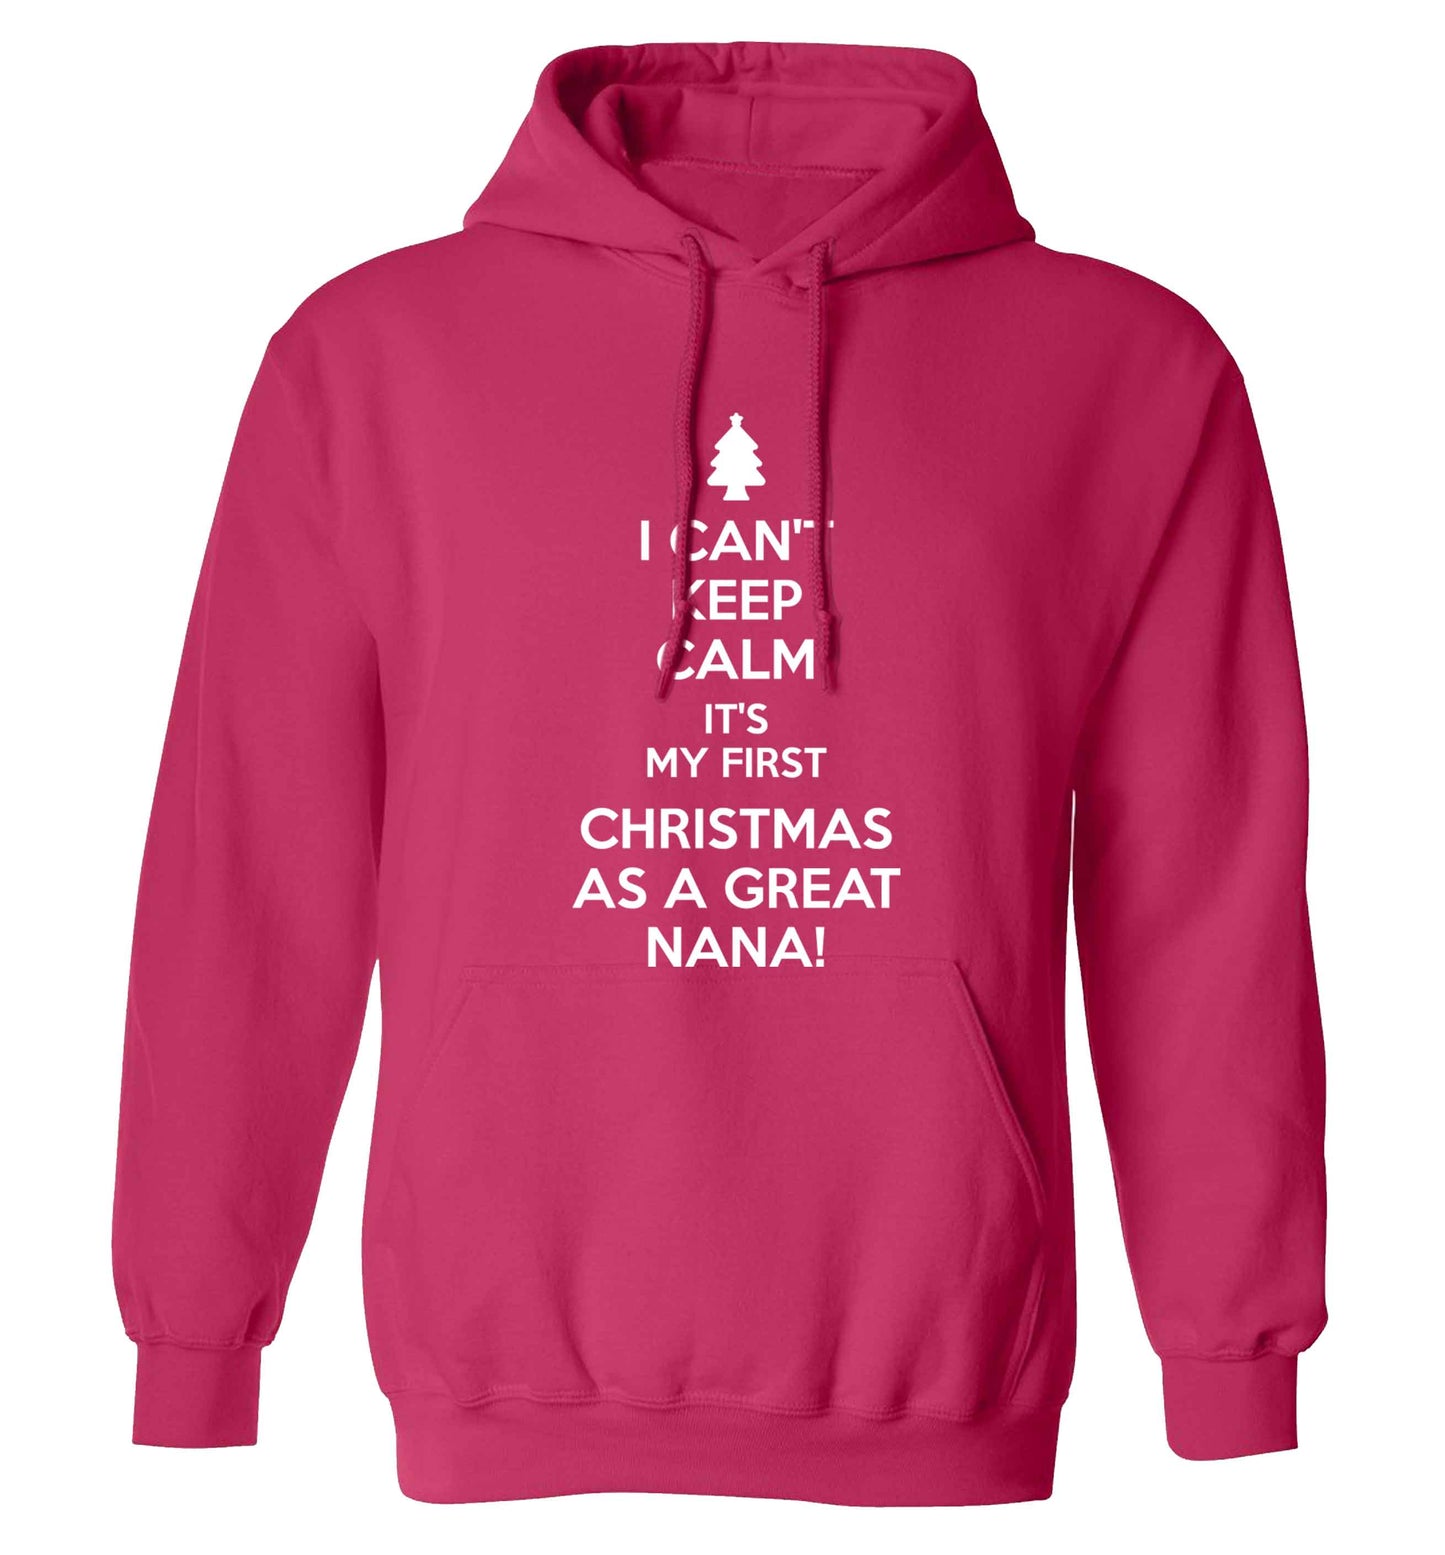 I can't keep calm it's my first Christmas as a great nana! adults unisex pink hoodie 2XL